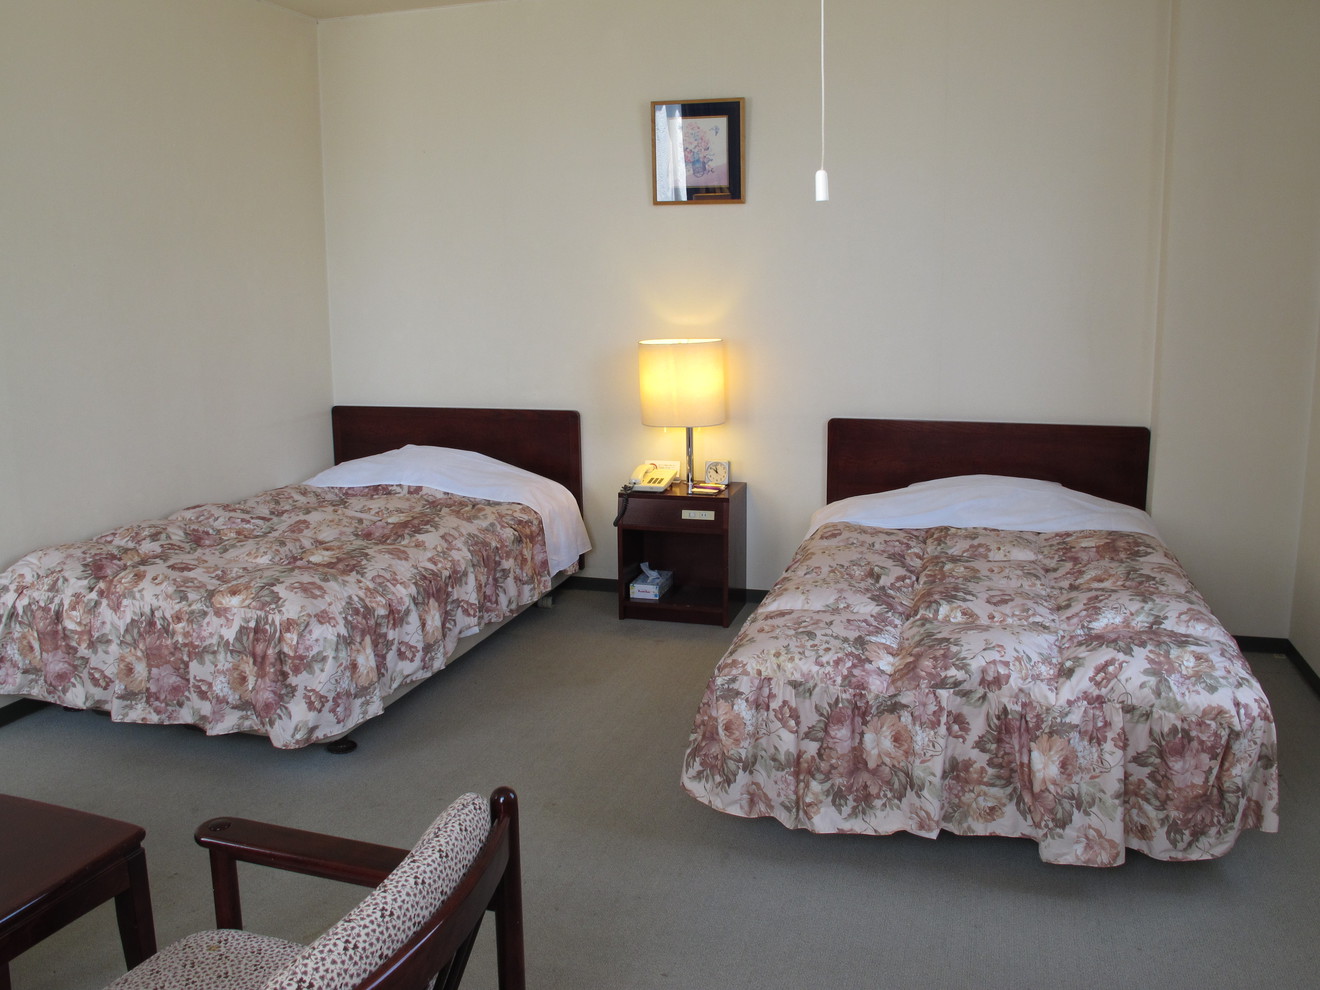 Hotel Green Plaza Hotel Green Plaza is a popular choice amongst travelers in Nagano, whether exploring or just passing through. The property offers a wide range of amenities and perks to ensure you have a great time. L